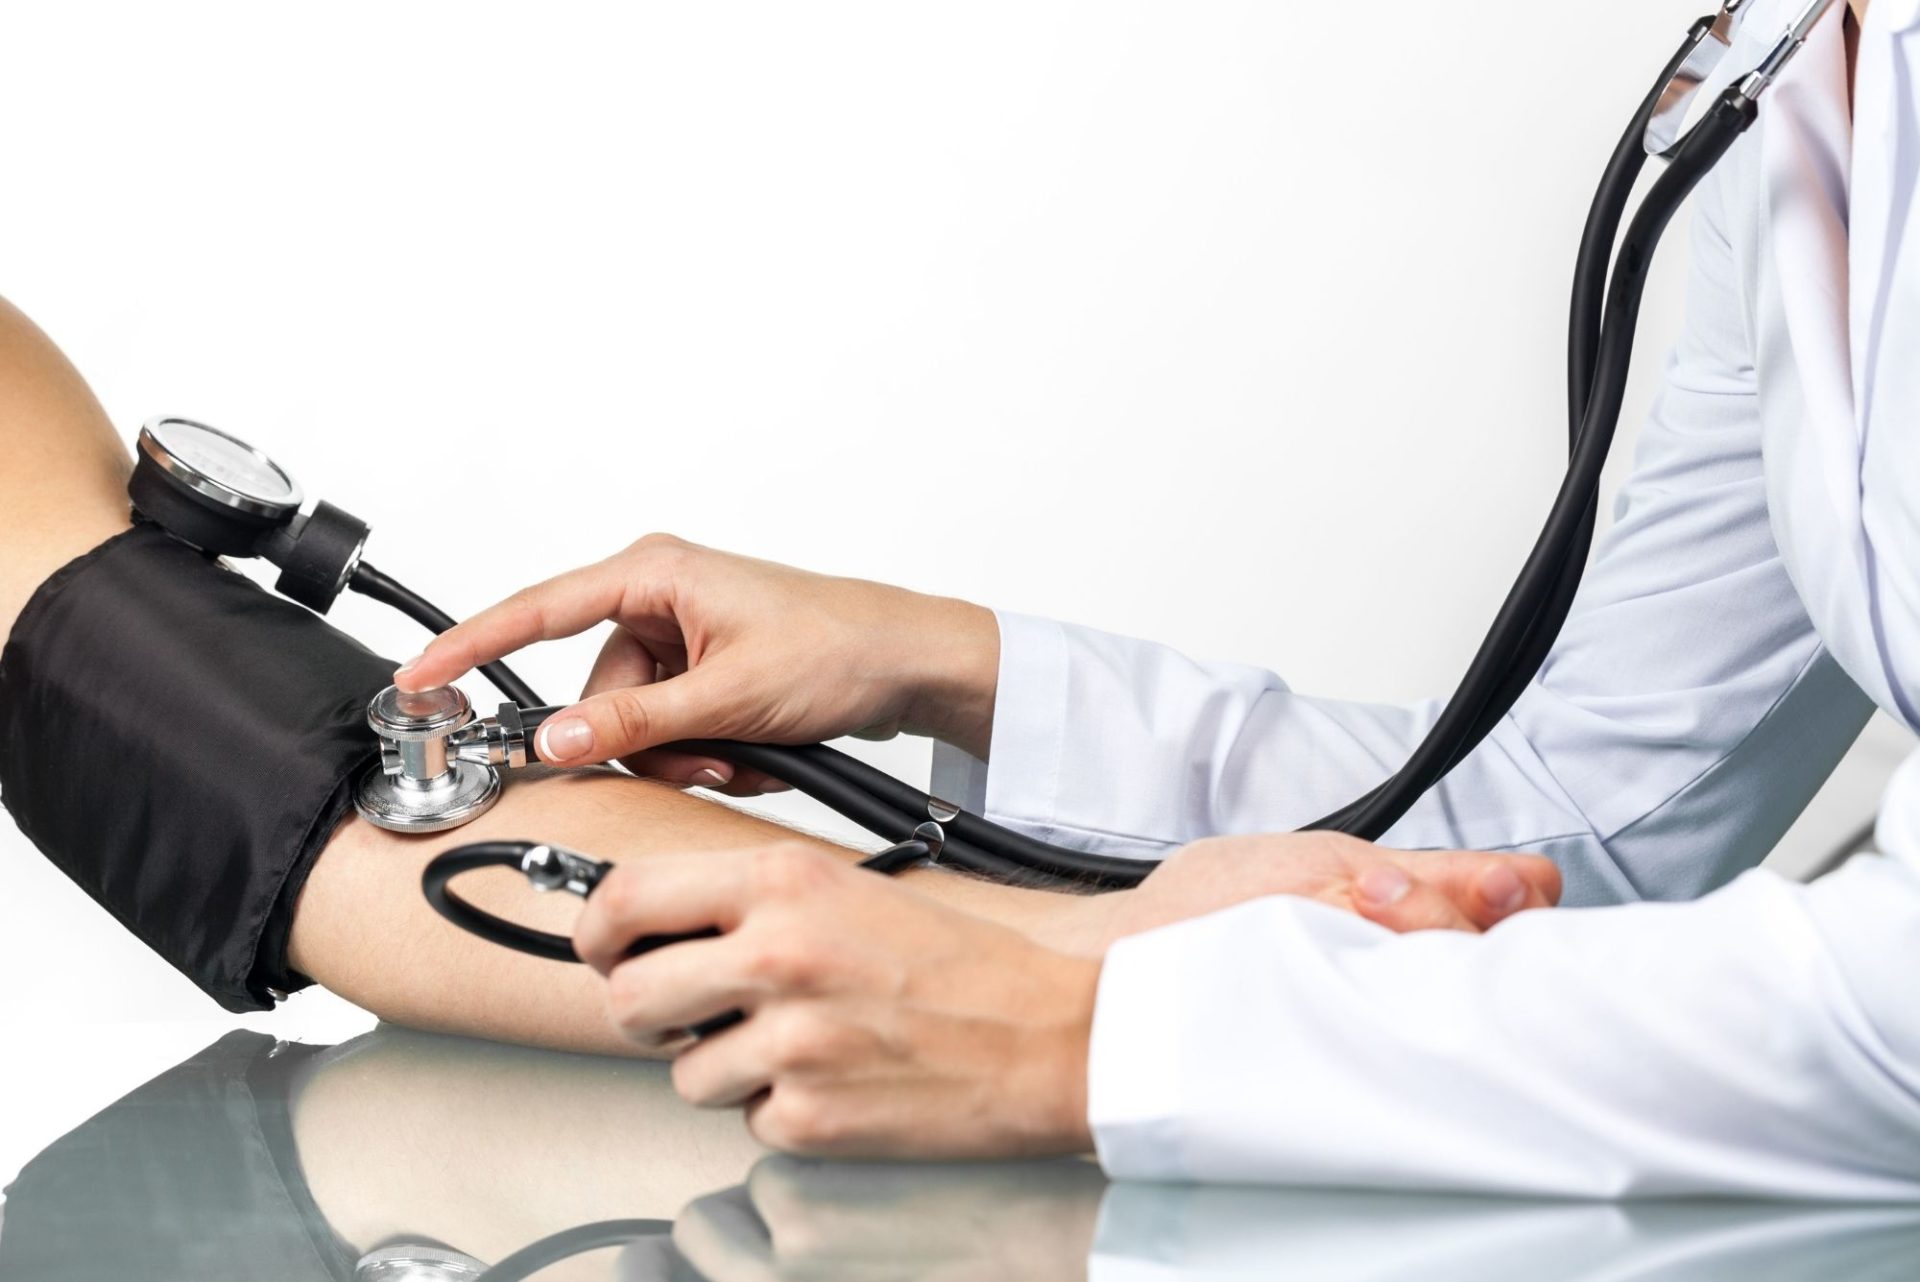 What You Need To Know About Your Blood Pressure